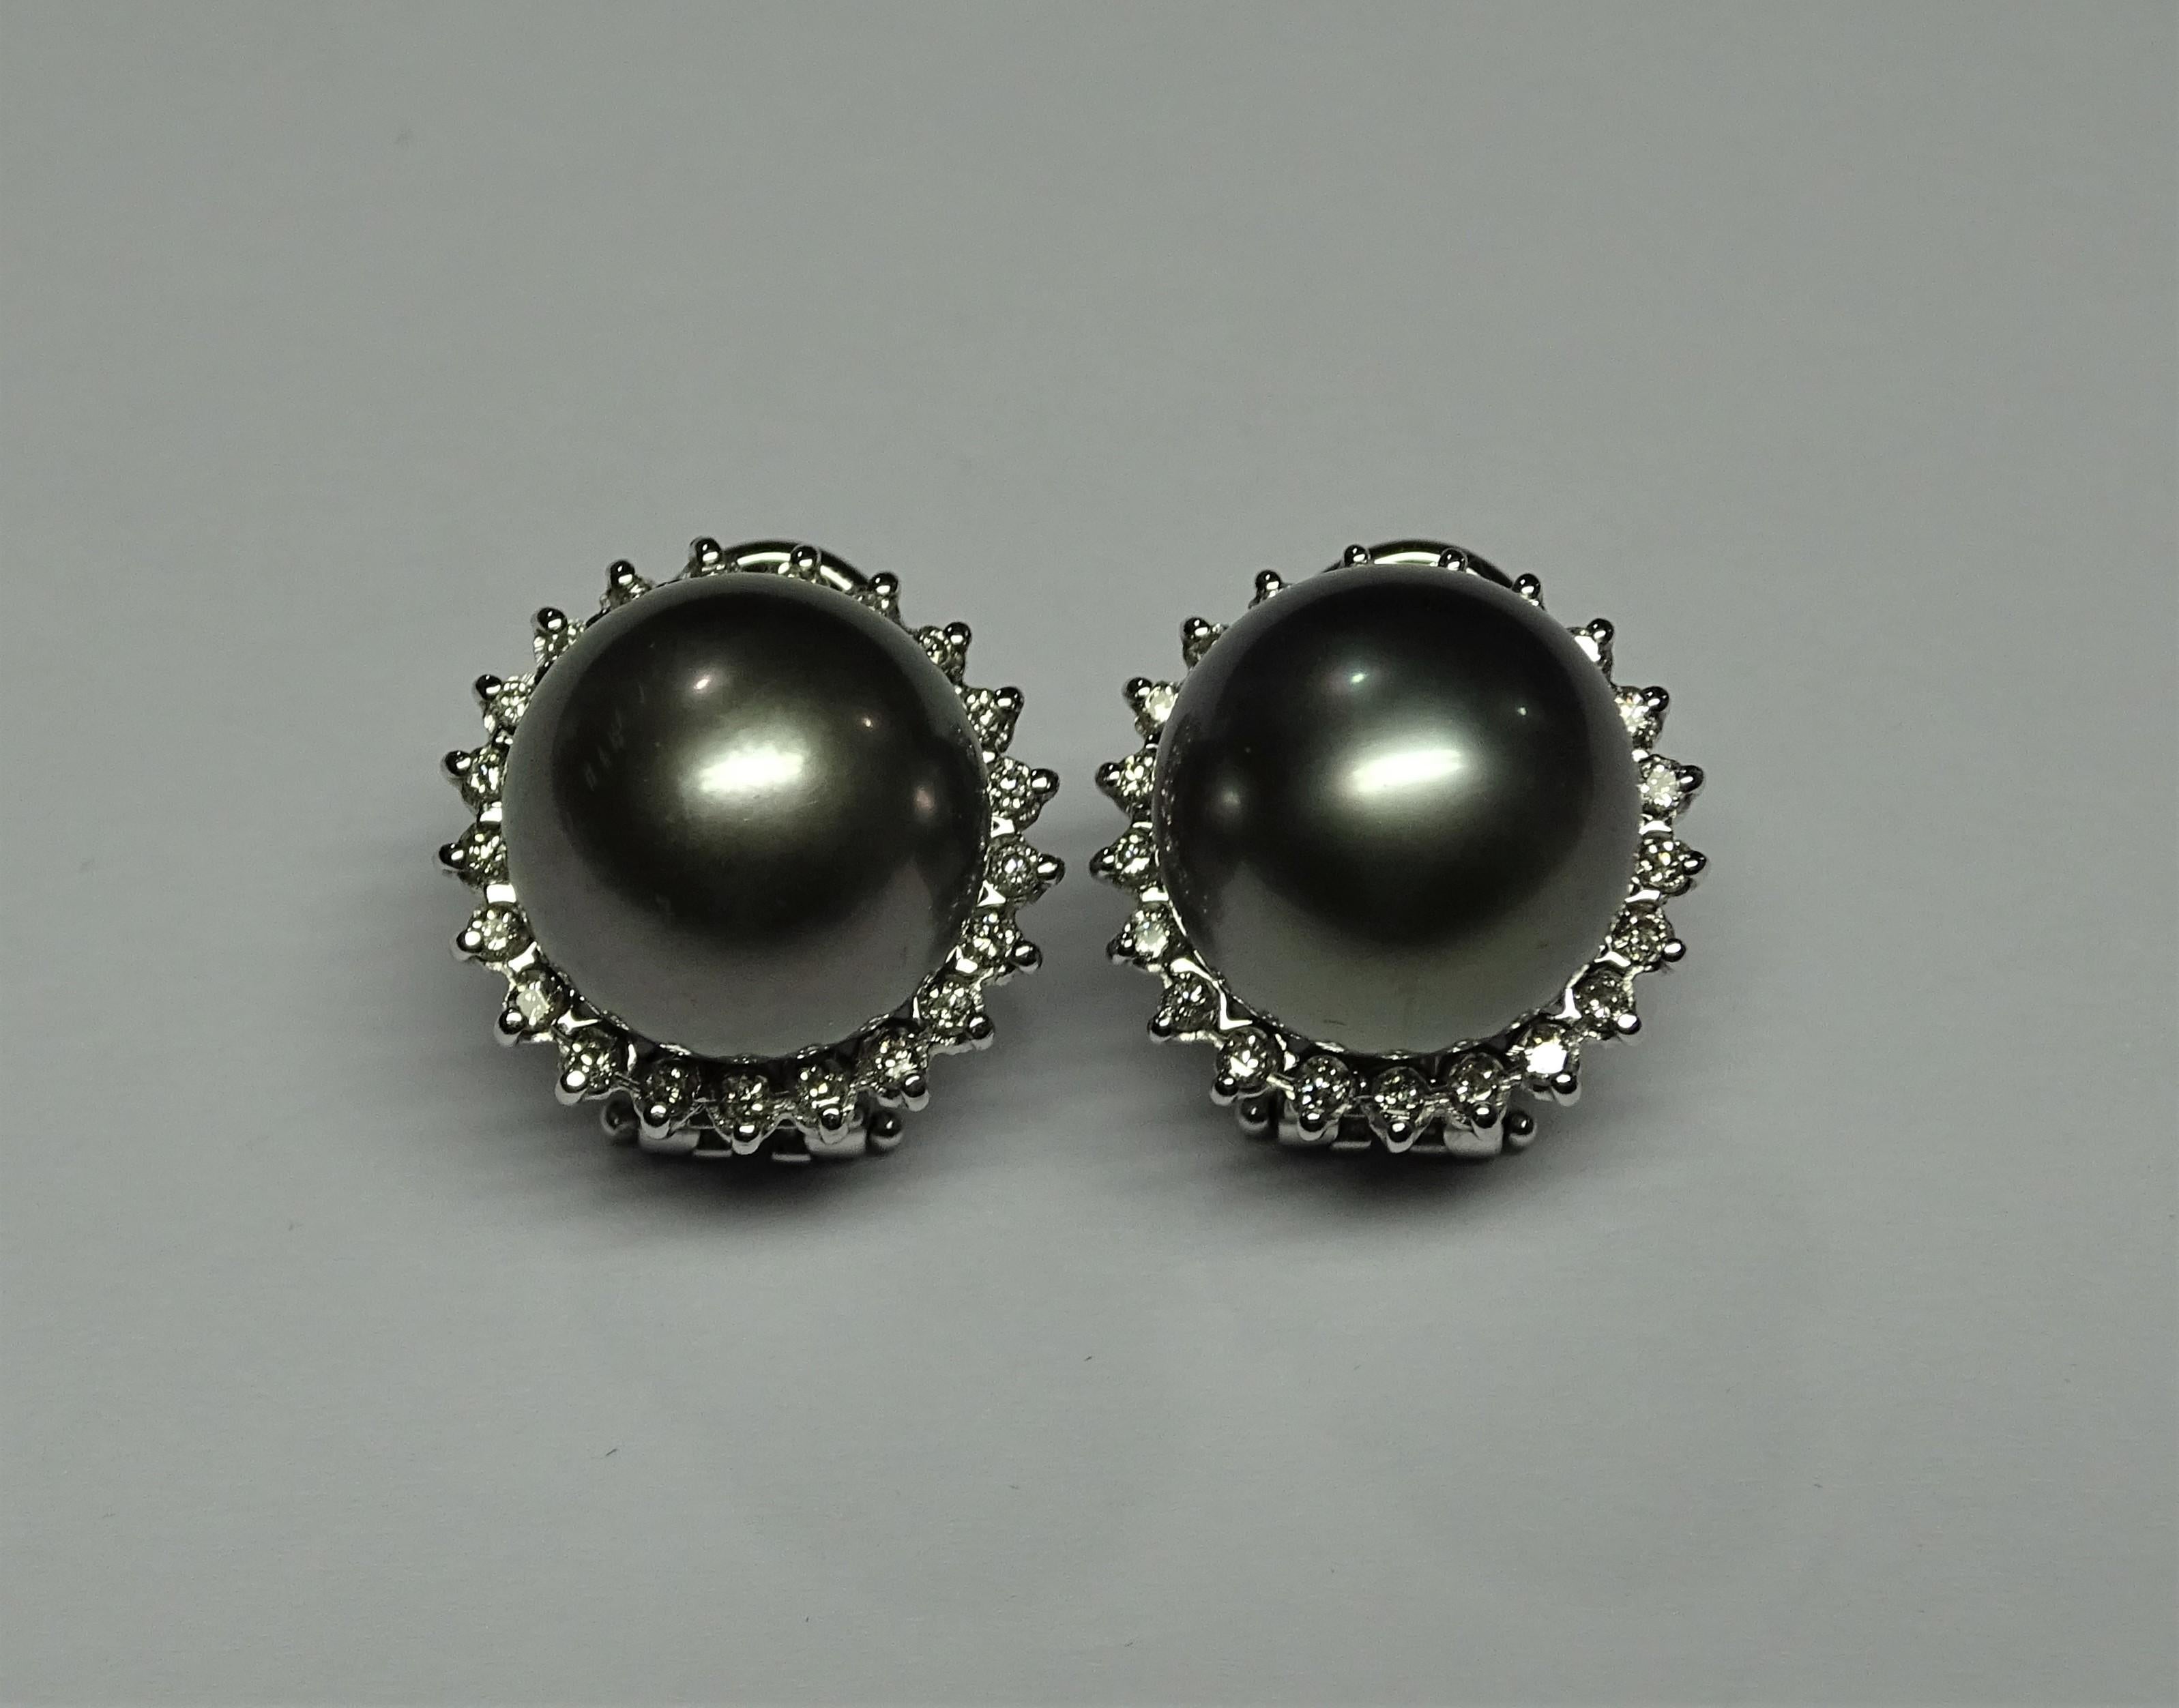 These Earrings are made of 14K White Gold.
These Earrings have 0.62 Carats of White Diamonds Round Cut.
These Earrings have 34.25 Carats of Tahiti Grey Pearls ( mm 12 ).
All our Earrings have pins for pierced ears but we can change the closure and